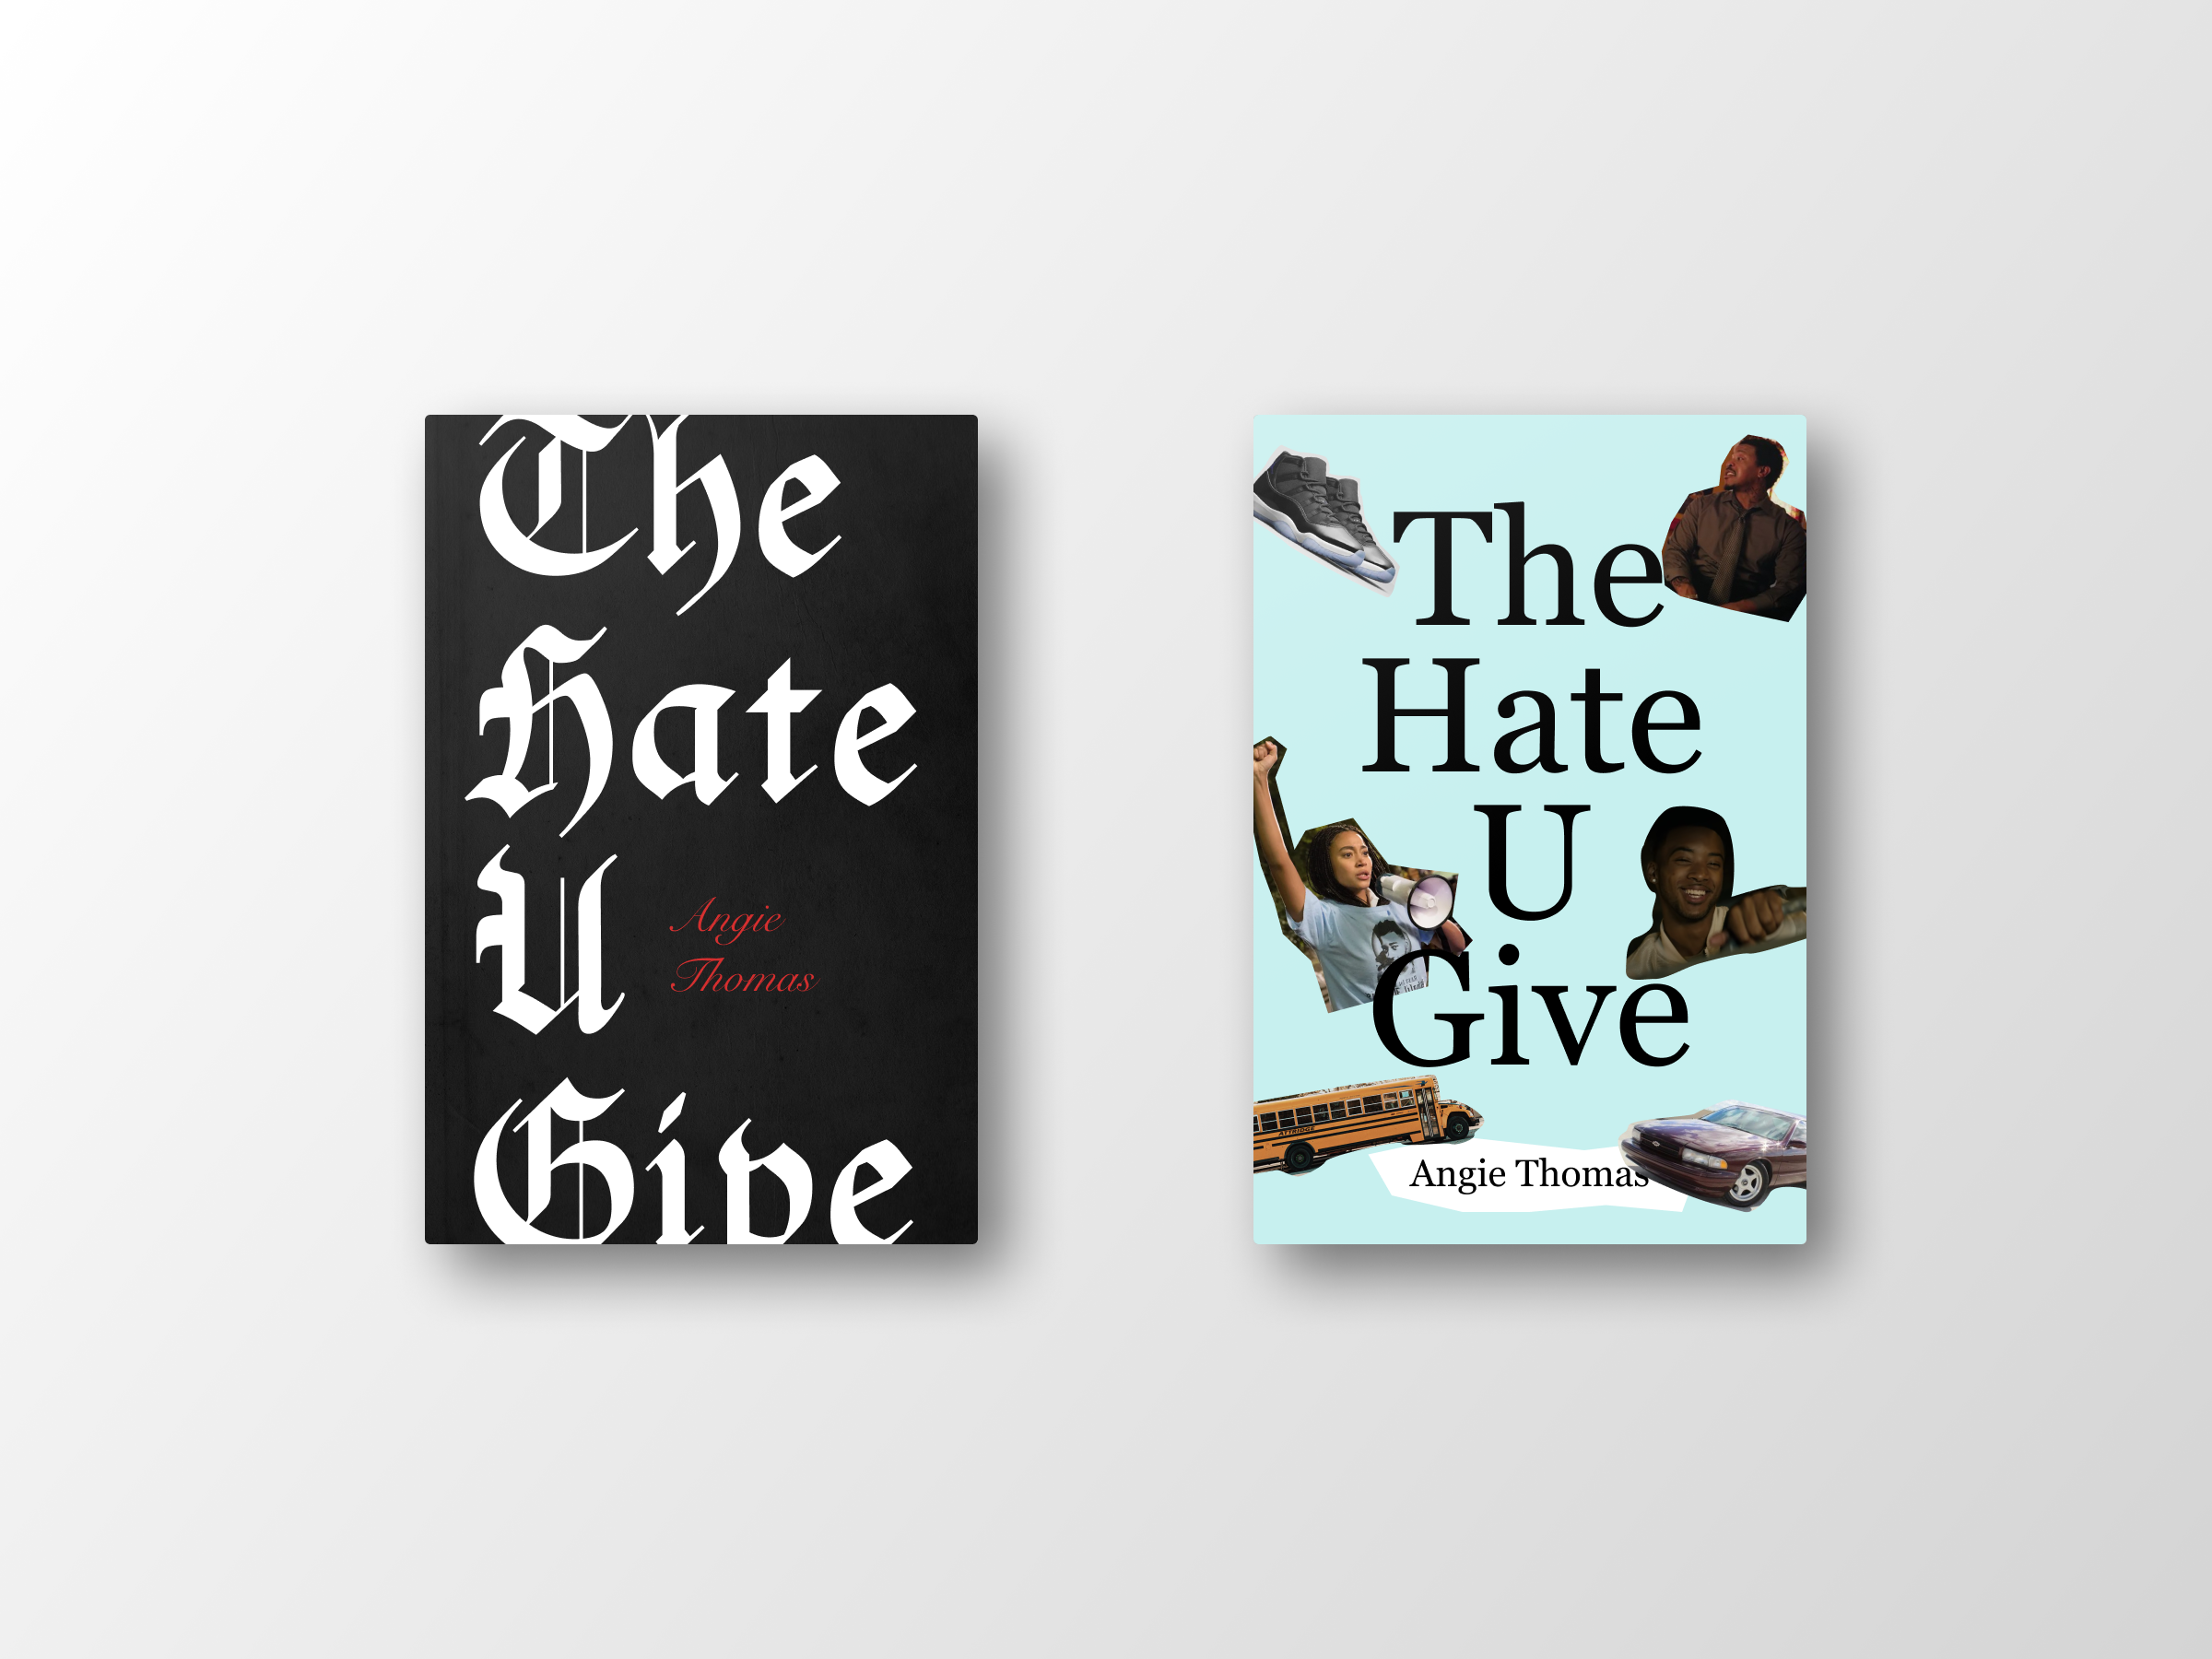 The hate u give book. The hate you give. The hate you give book. Give that book to